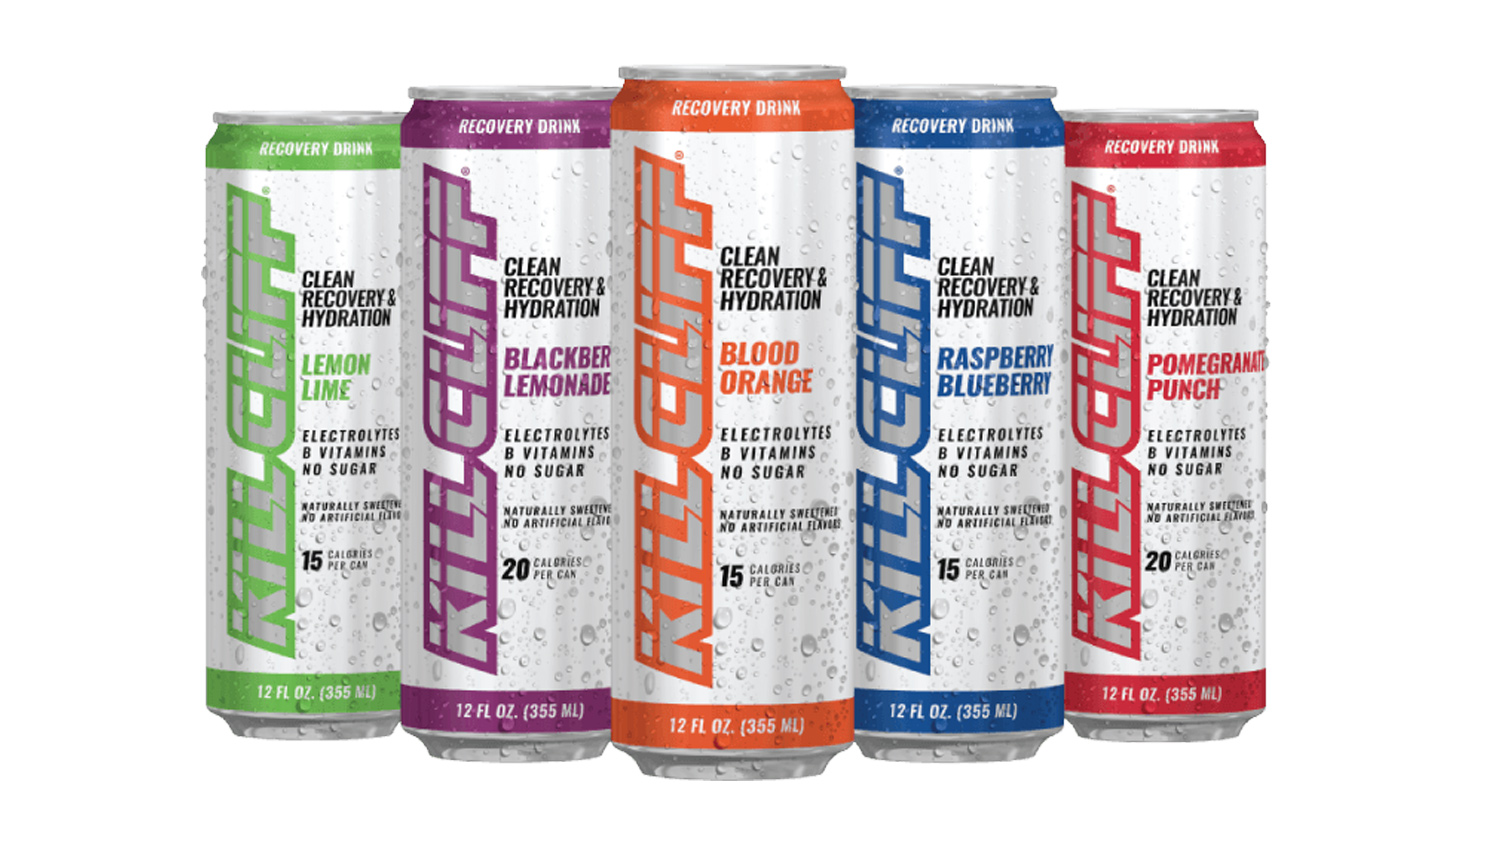 Kill Cliff Recovery Sports Drink